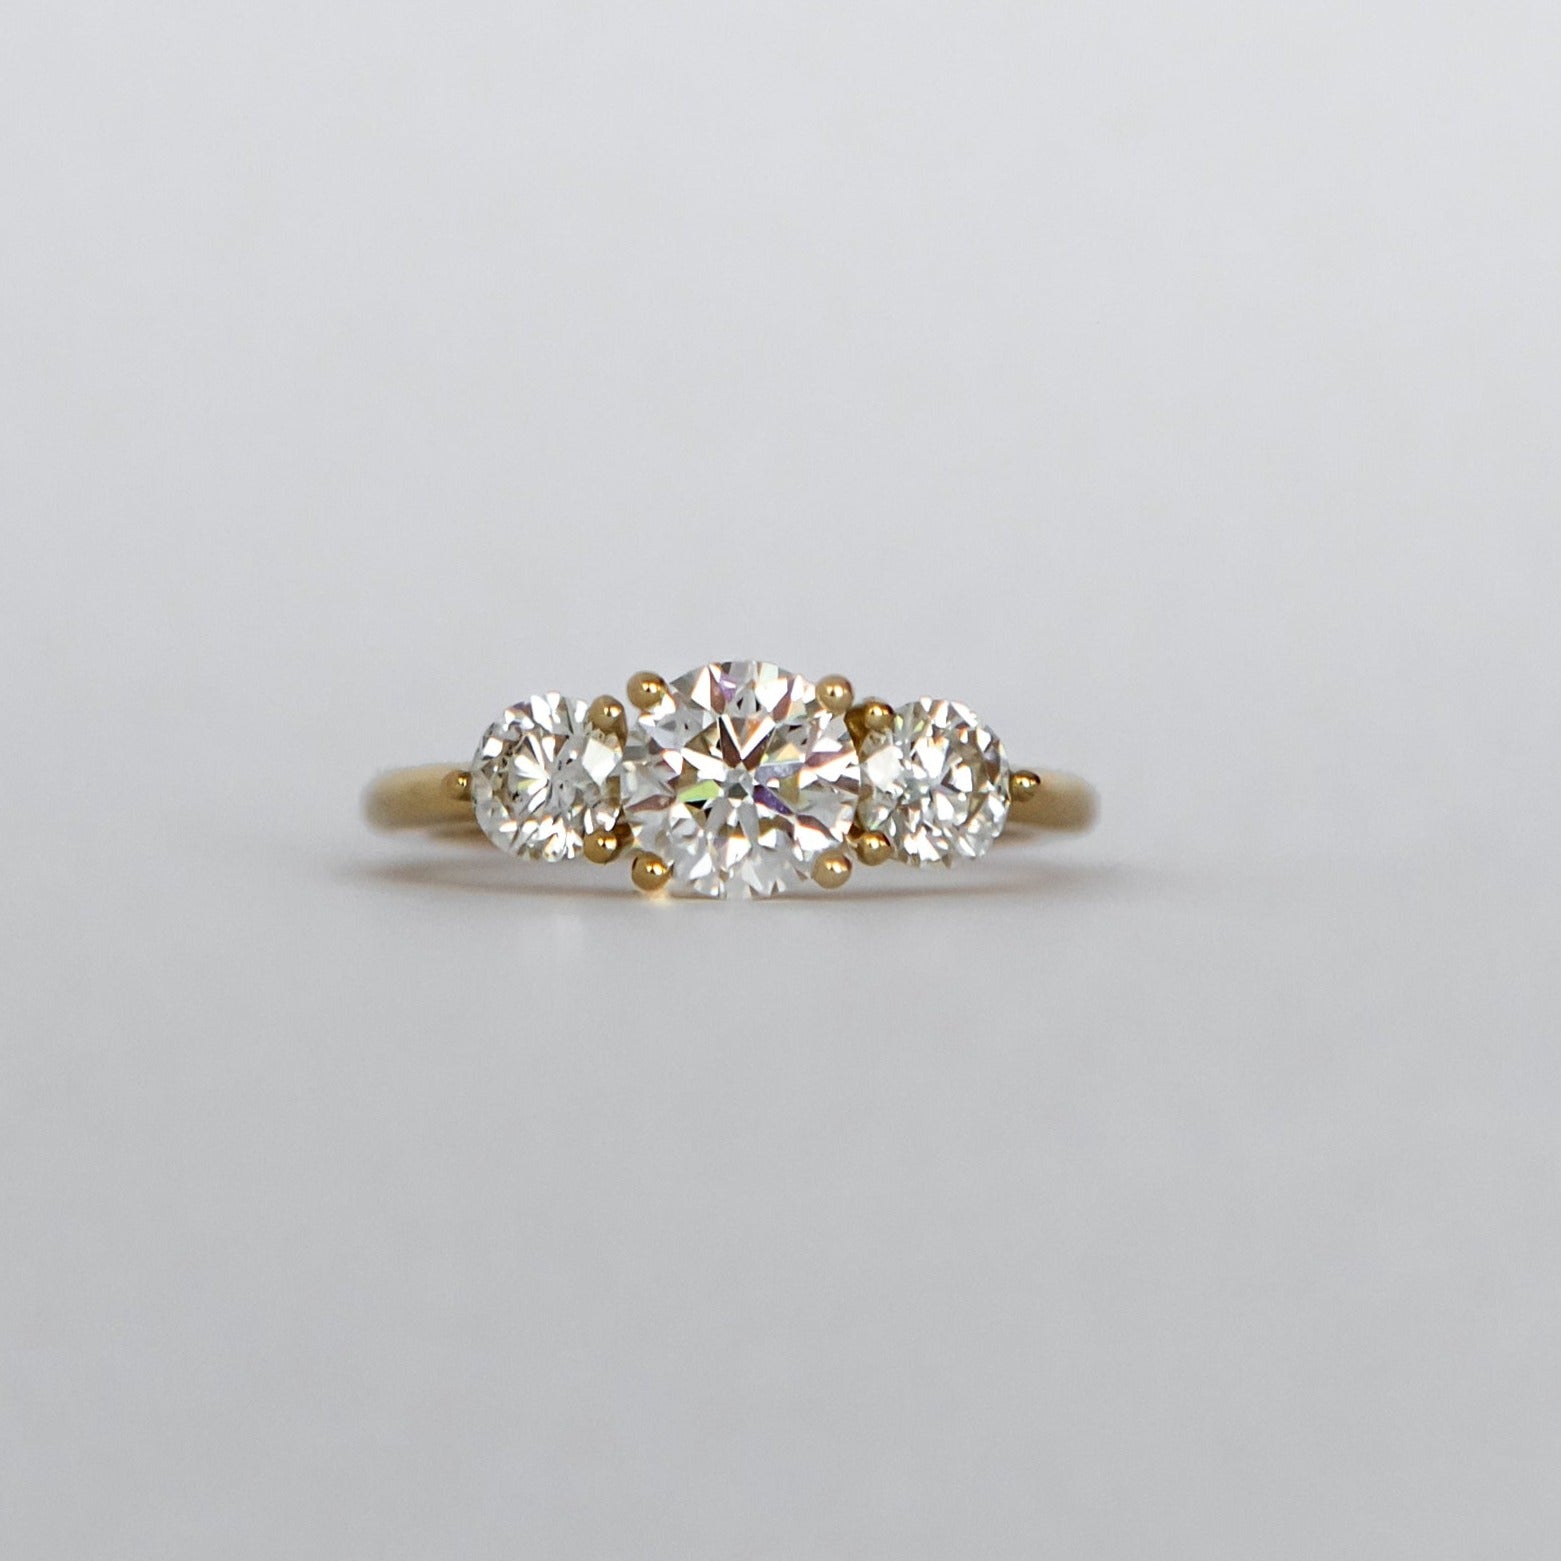 18ct yellow gold trilogy ring with 0.90ct oval cut diamond as the centre stone flanked by two smaller diamonds.